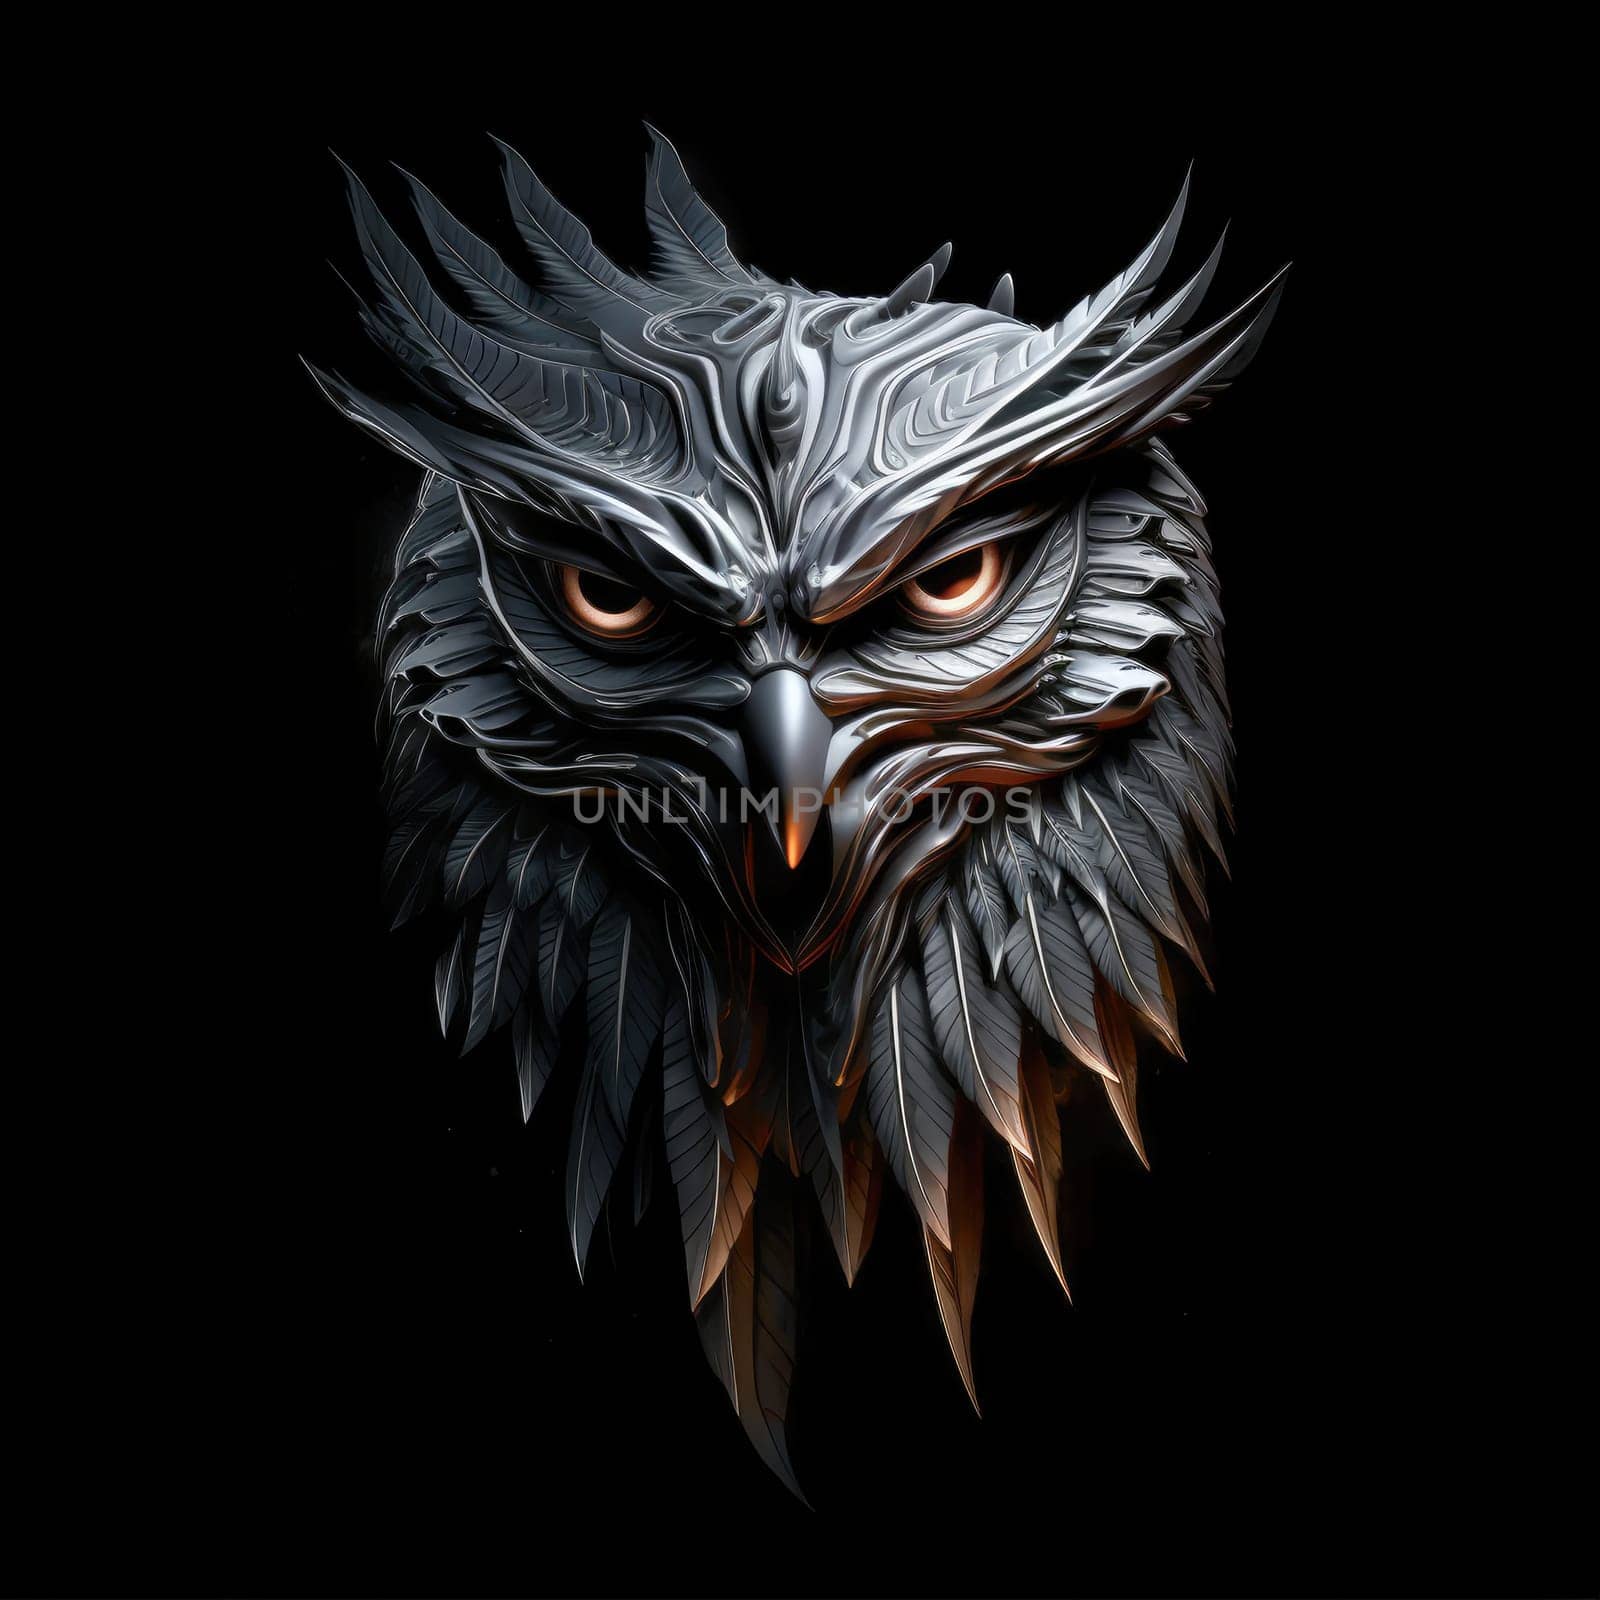 Decorative image of a wise owl glowing on a dark background. Design element and template for poster, t-shirt print, sticker, etc.